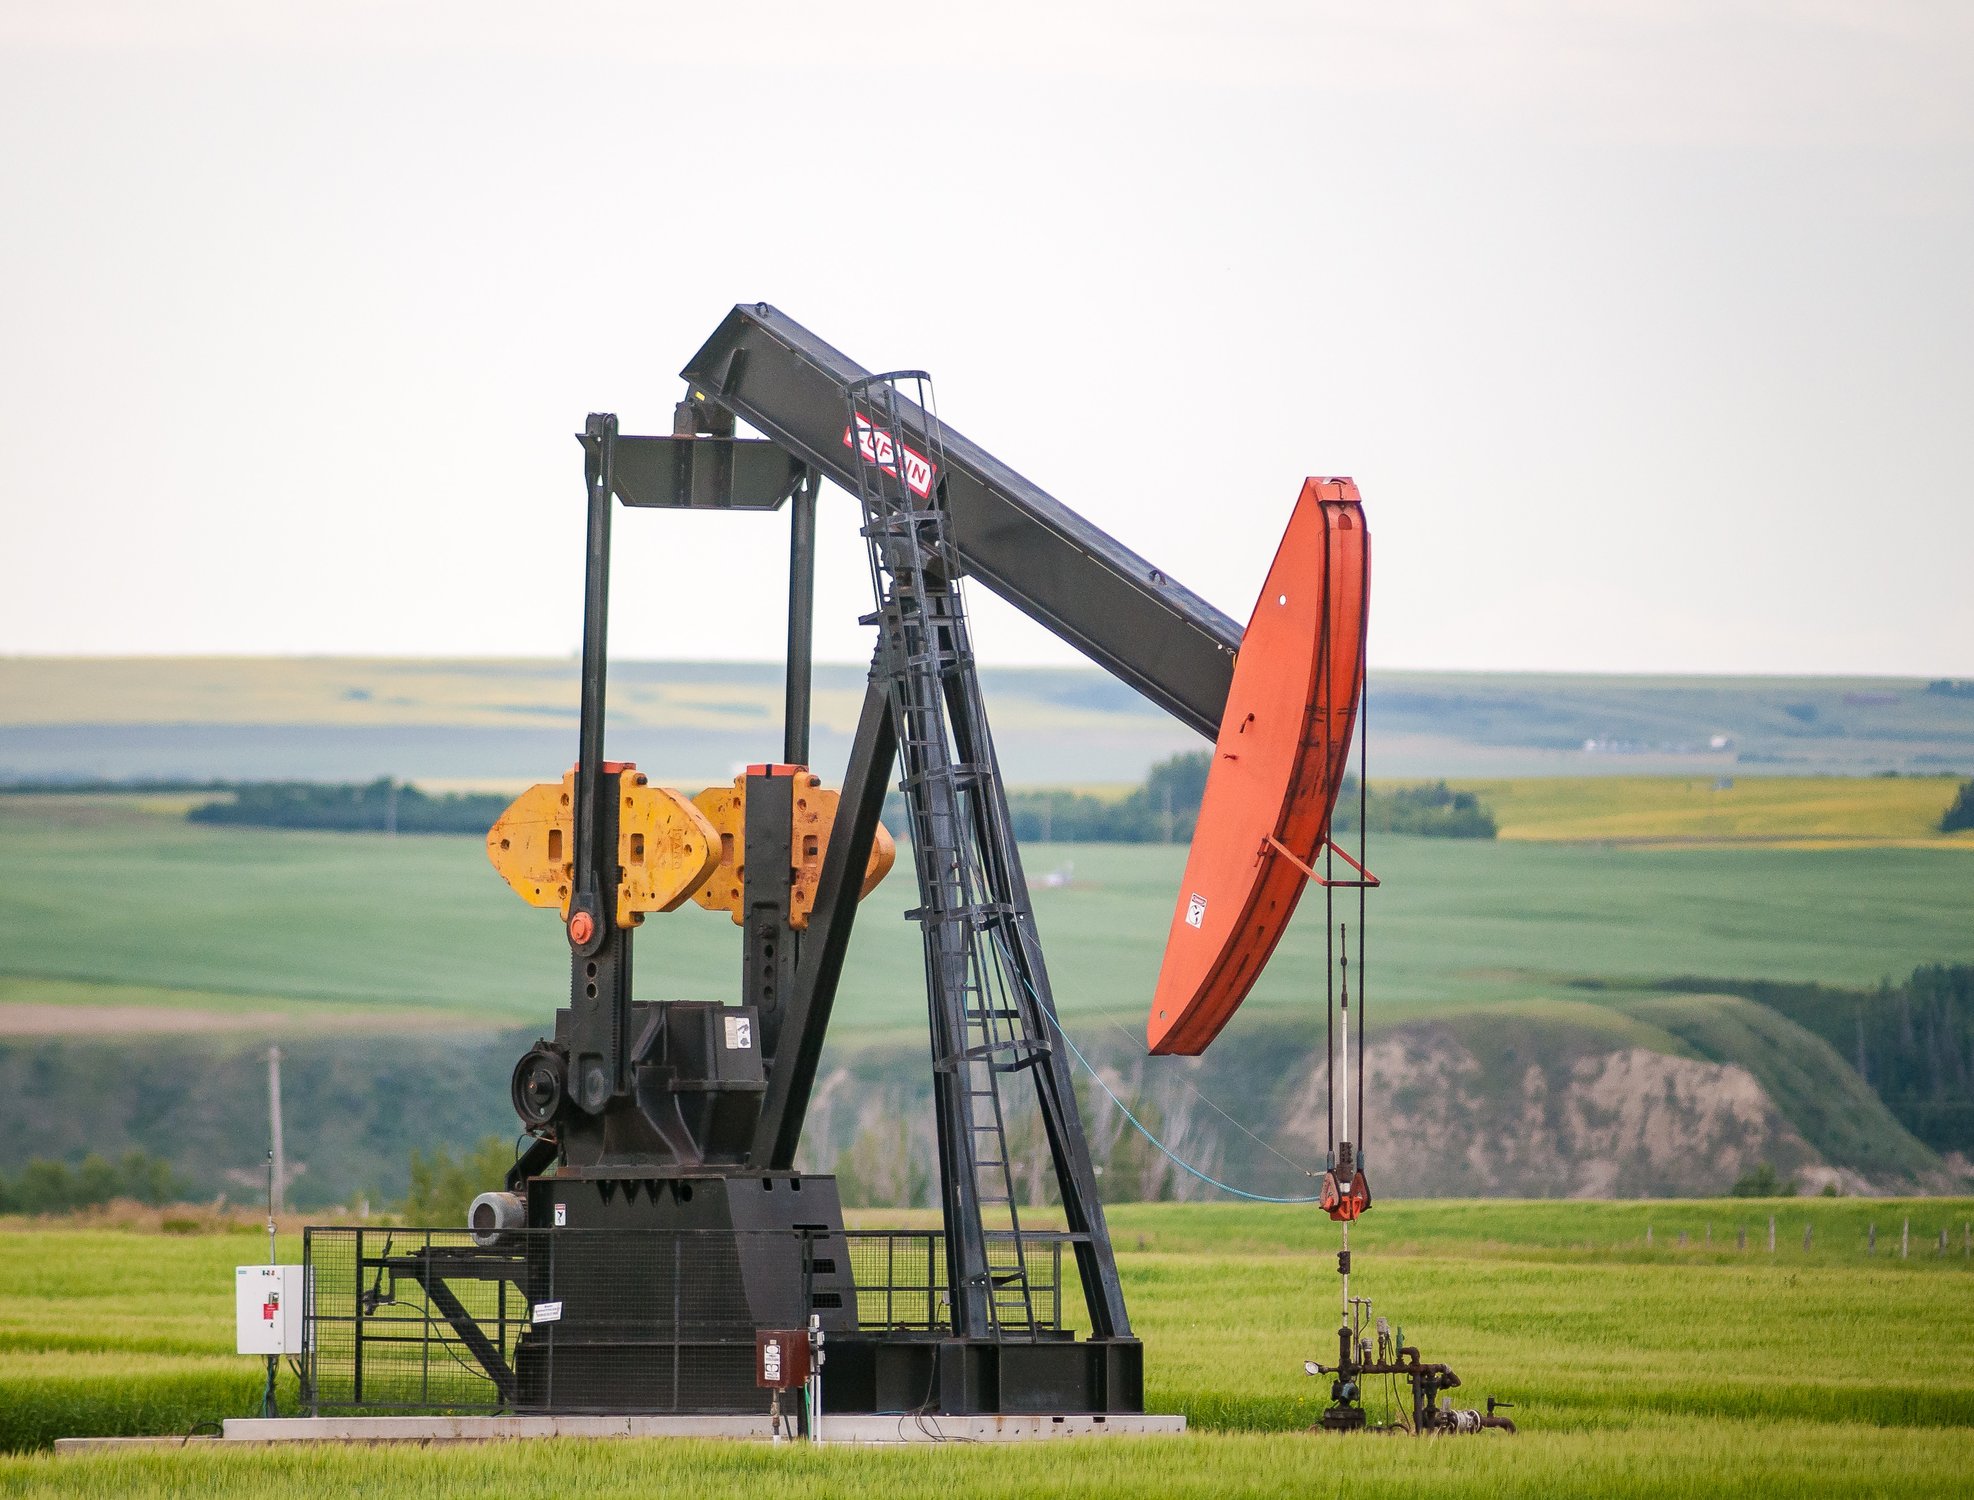 An oil drilling machine with a red top in an open green field